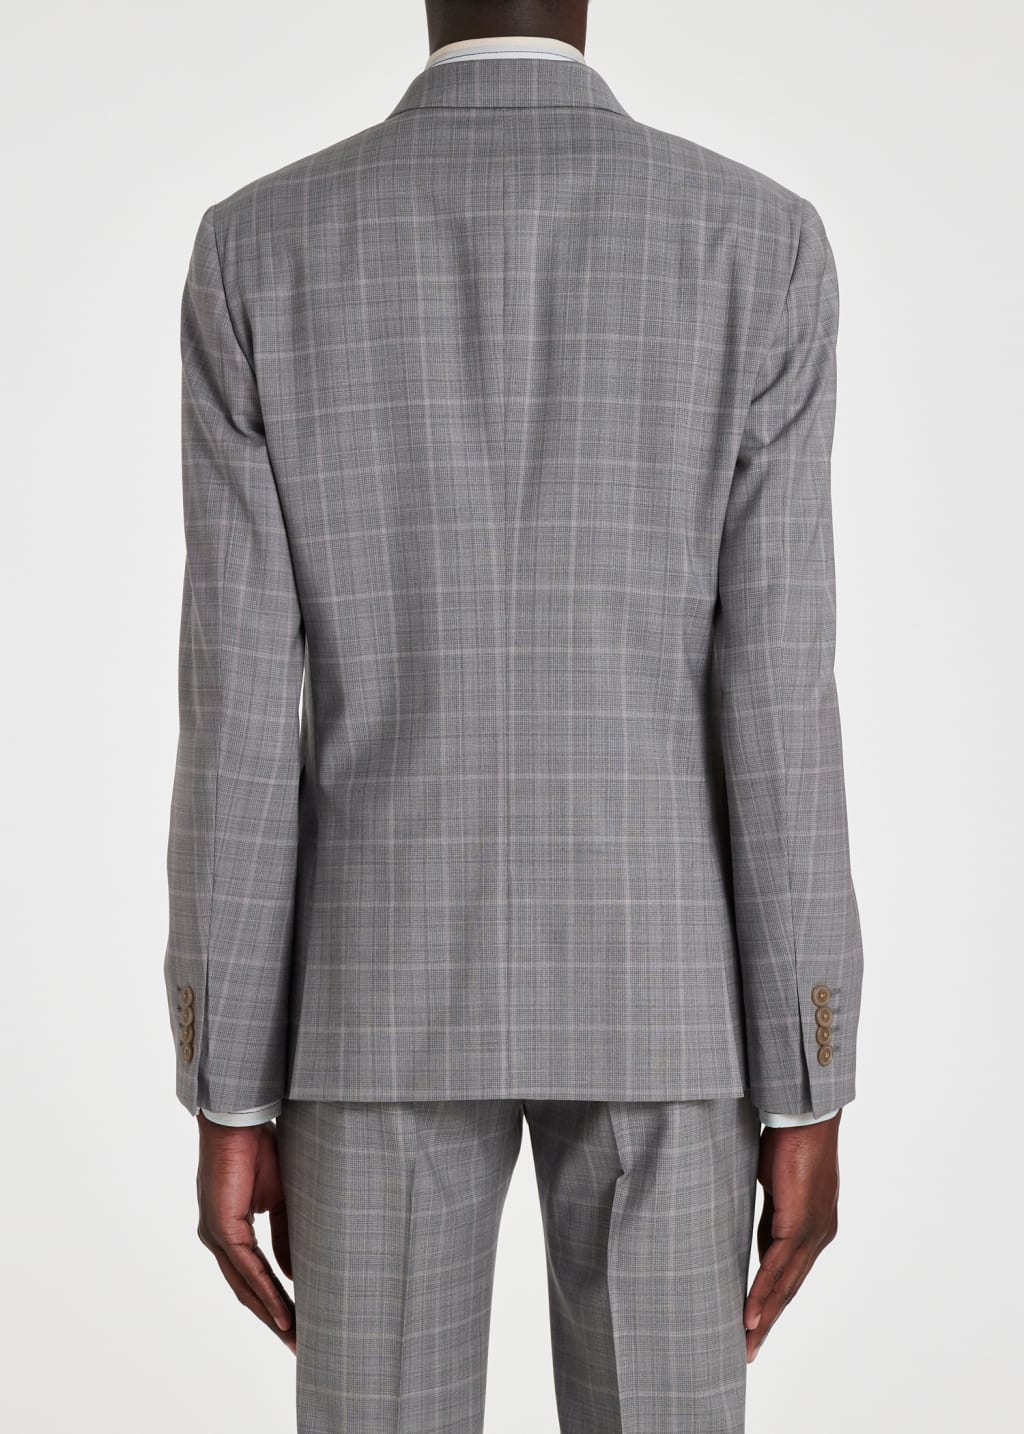 Model View - The Kensington - Slim-Fit Grey and Pink Check Wool Suit Paul Smith